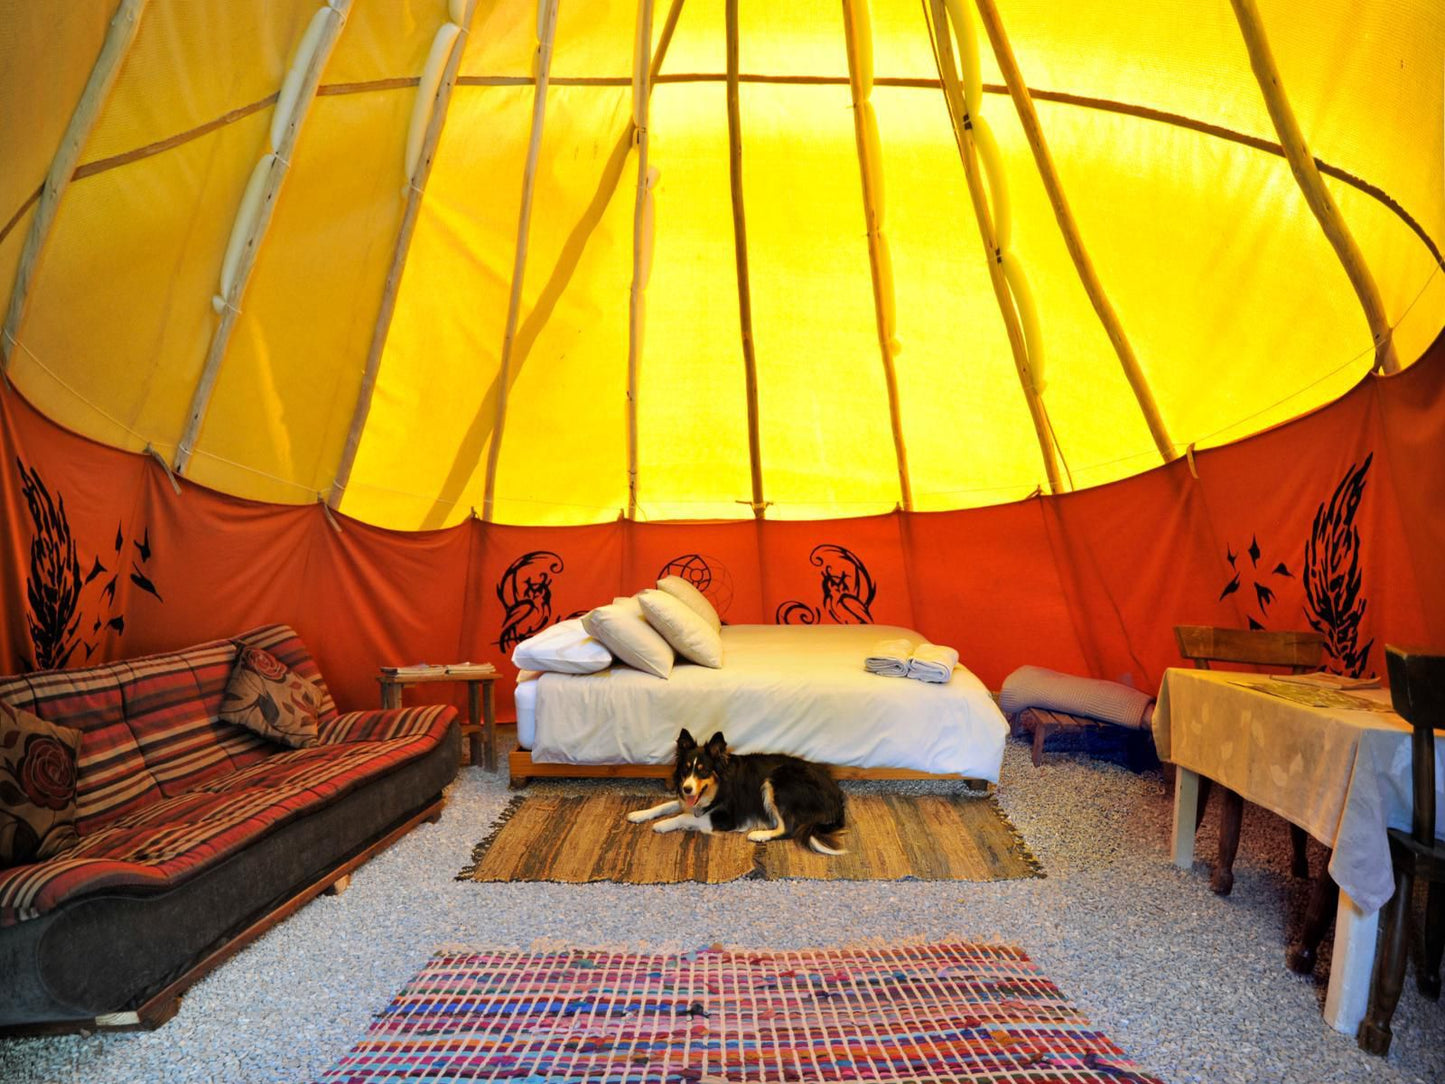 Lancewood Tipi Lodge Assegai Rest Robertson Western Cape South Africa Colorful, Cat, Mammal, Animal, Pet, Tent, Architecture